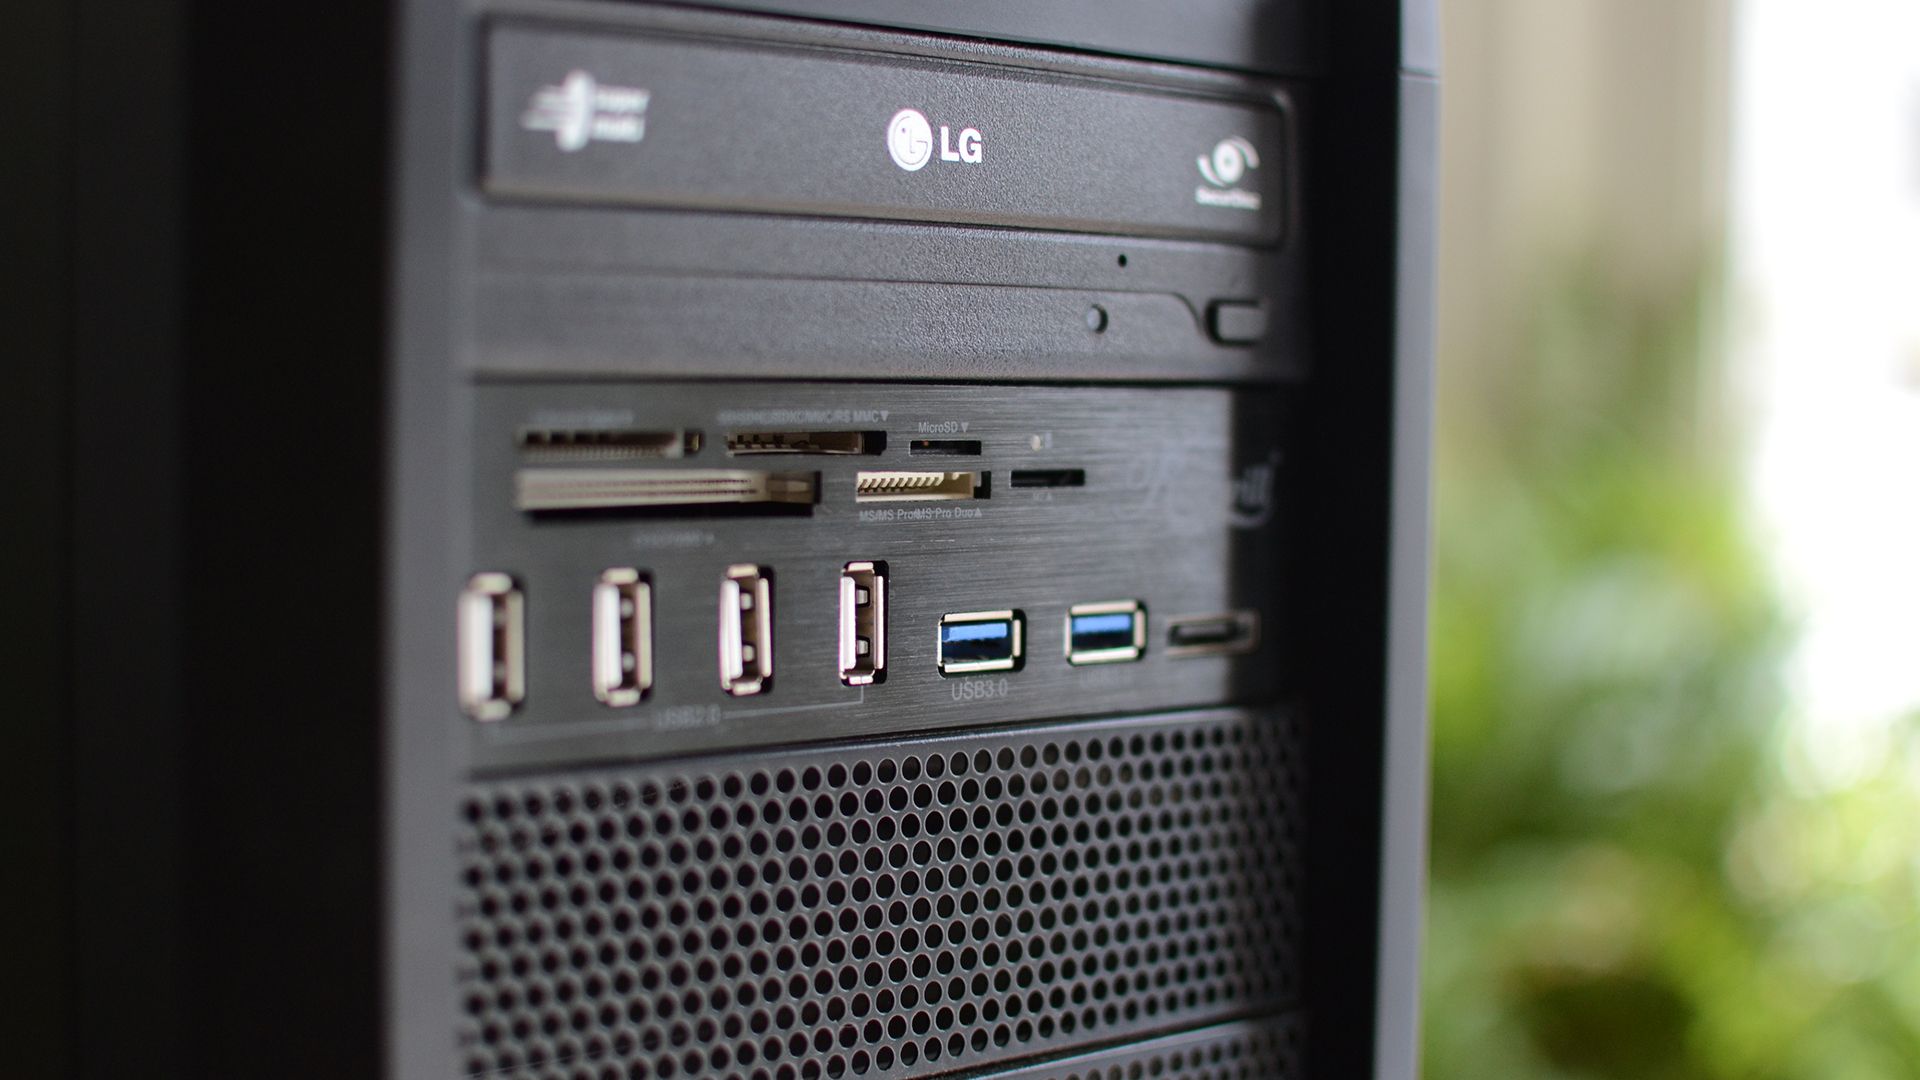 An add-on USB front panel for a desktop PC.